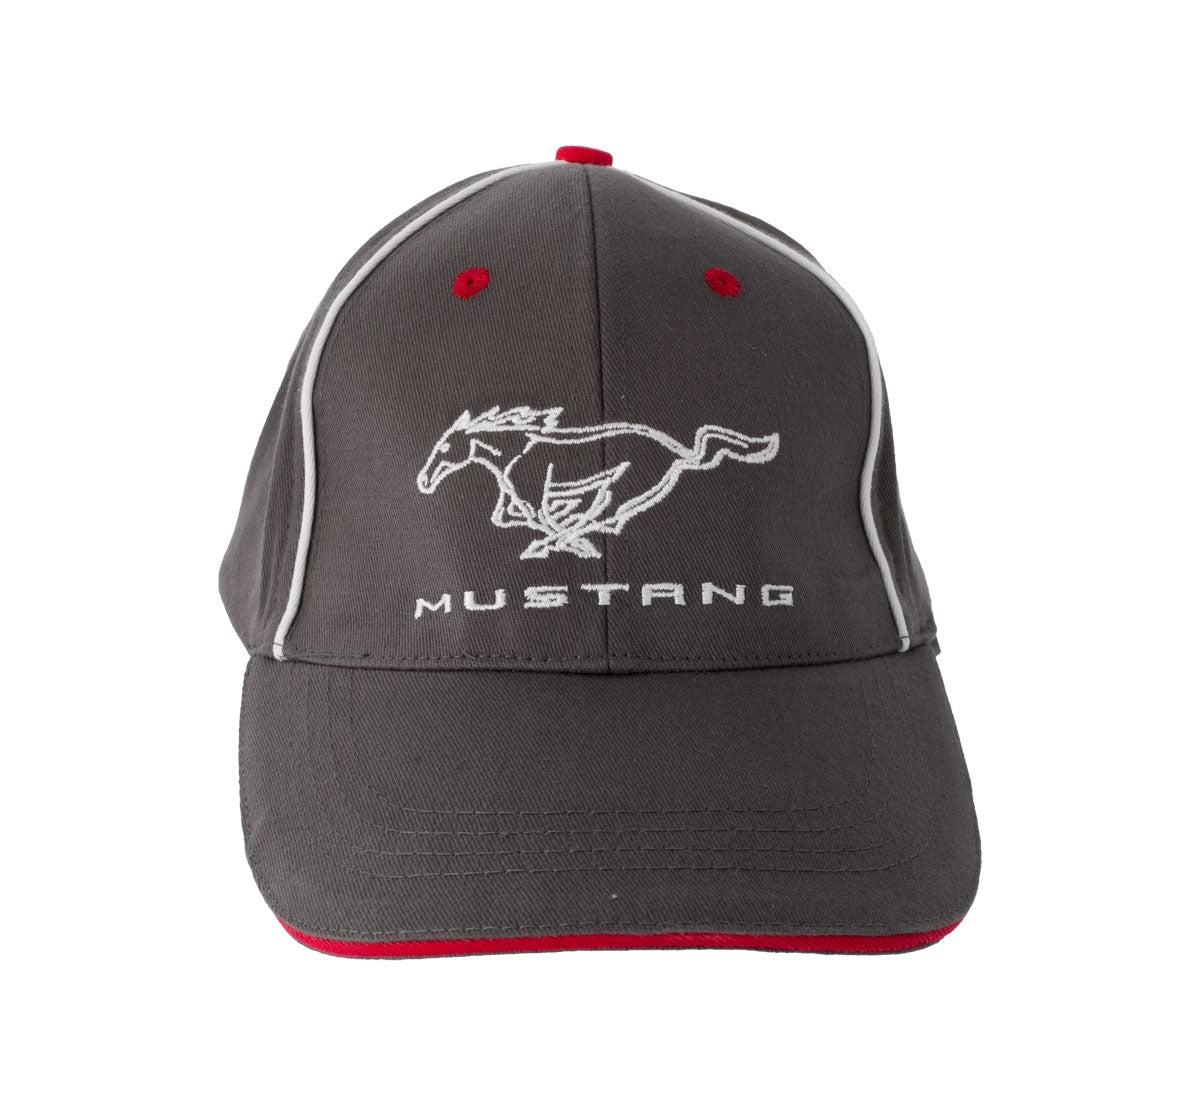 Ford Mustang Running Horse Pony Logo Grey Red & White Adjustable Hat Cap